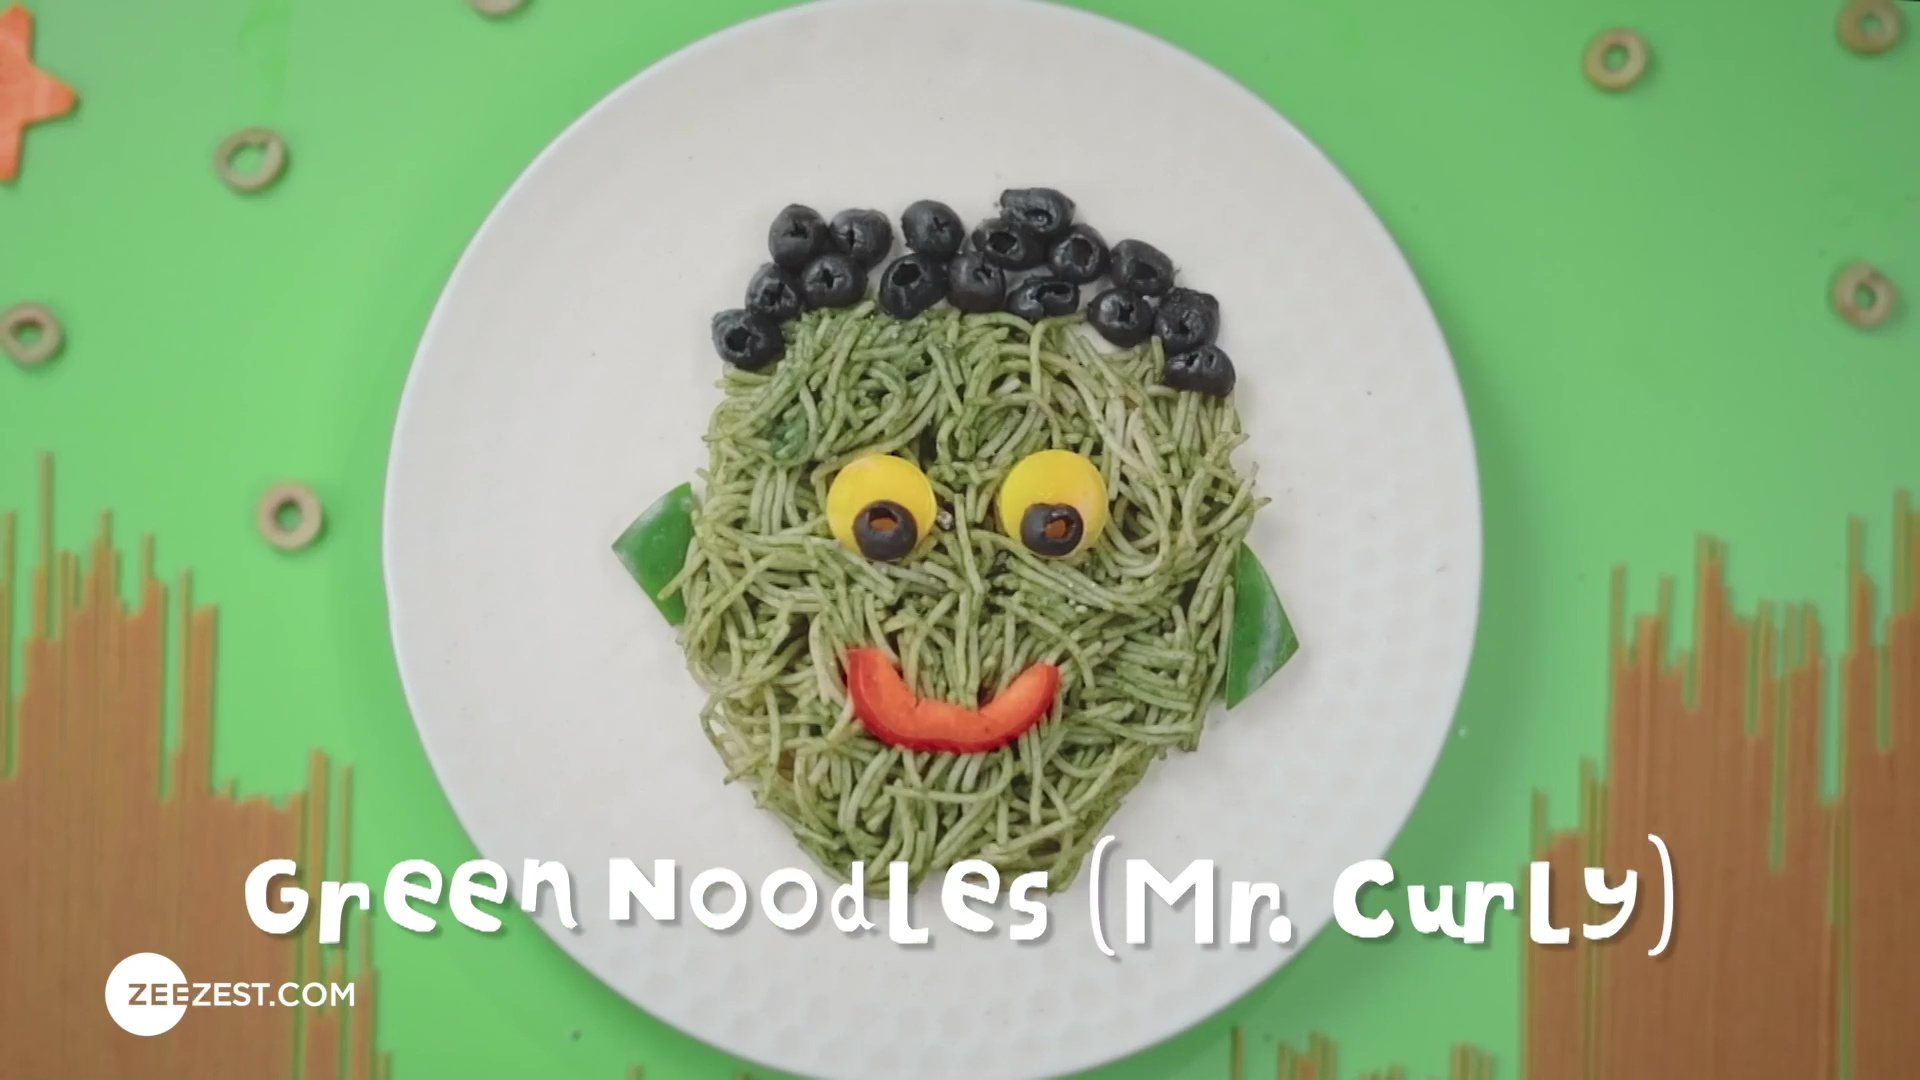 Green Noodles (Mr. Curly)